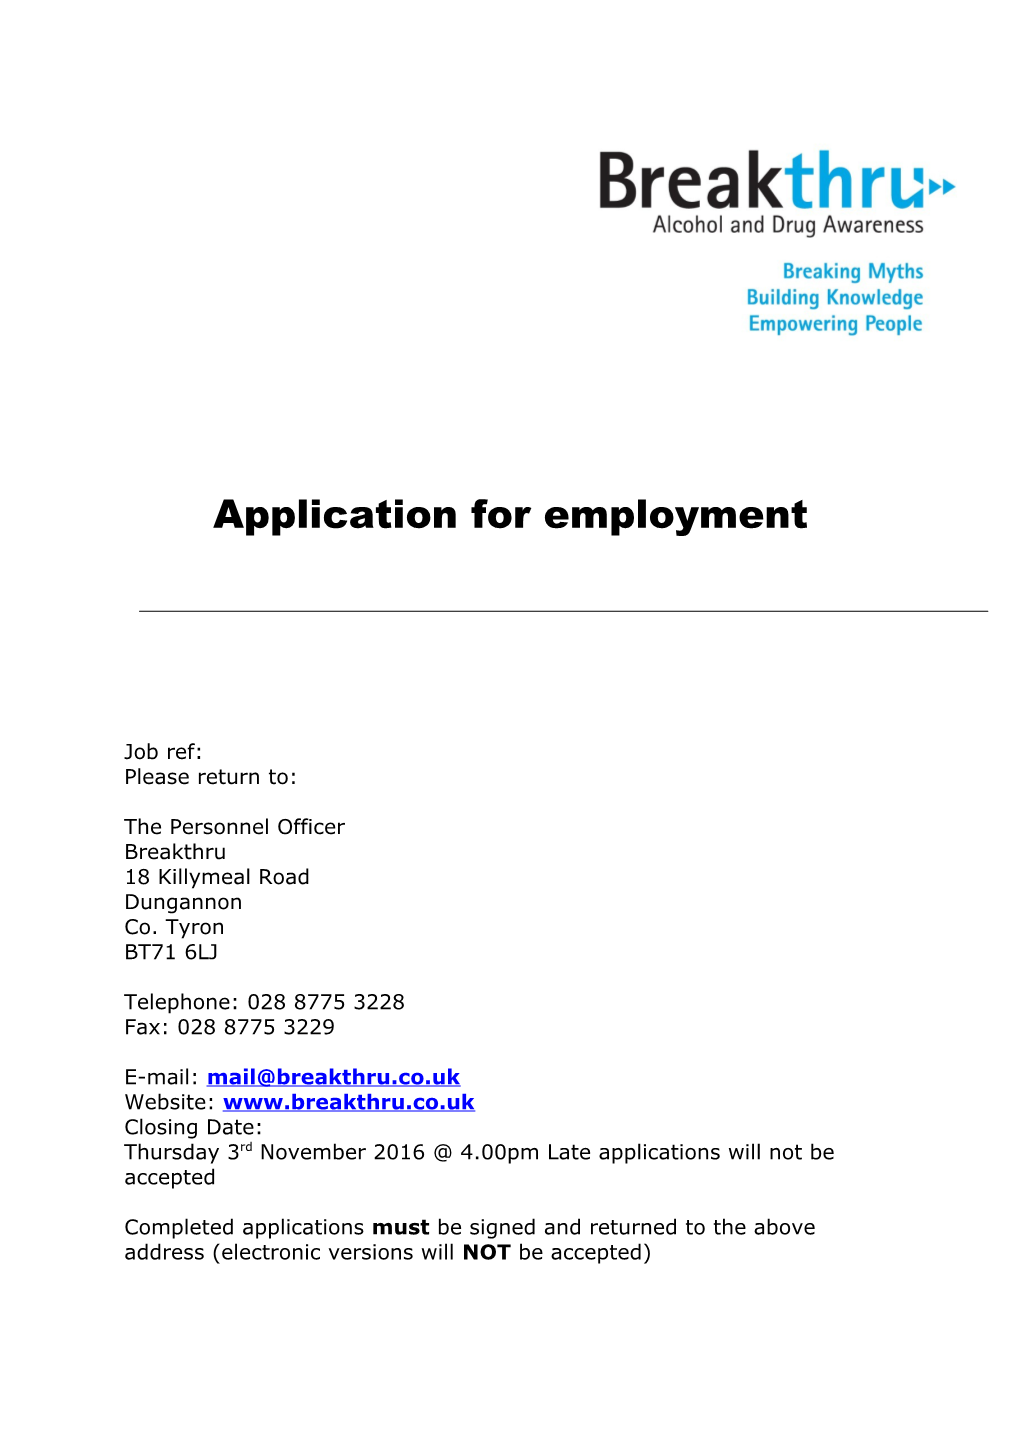 Application for Employment s84